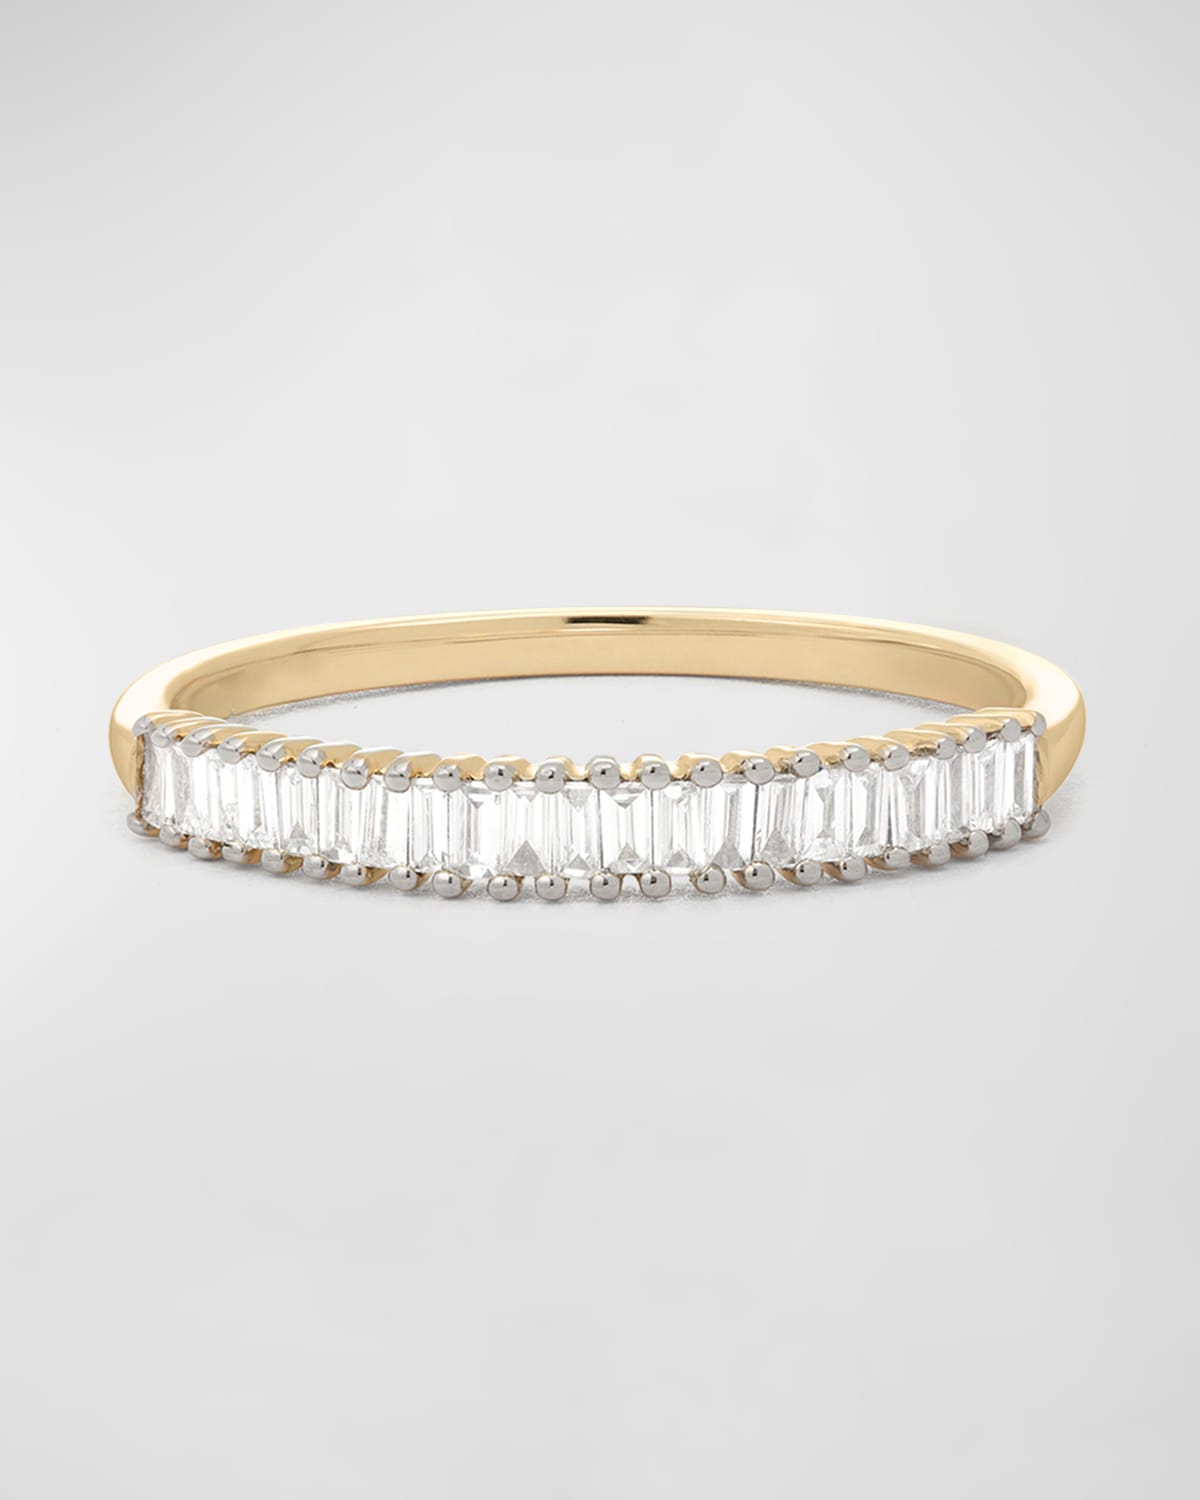 Up and Down Baguette Diamond Line Band, Size 5-7